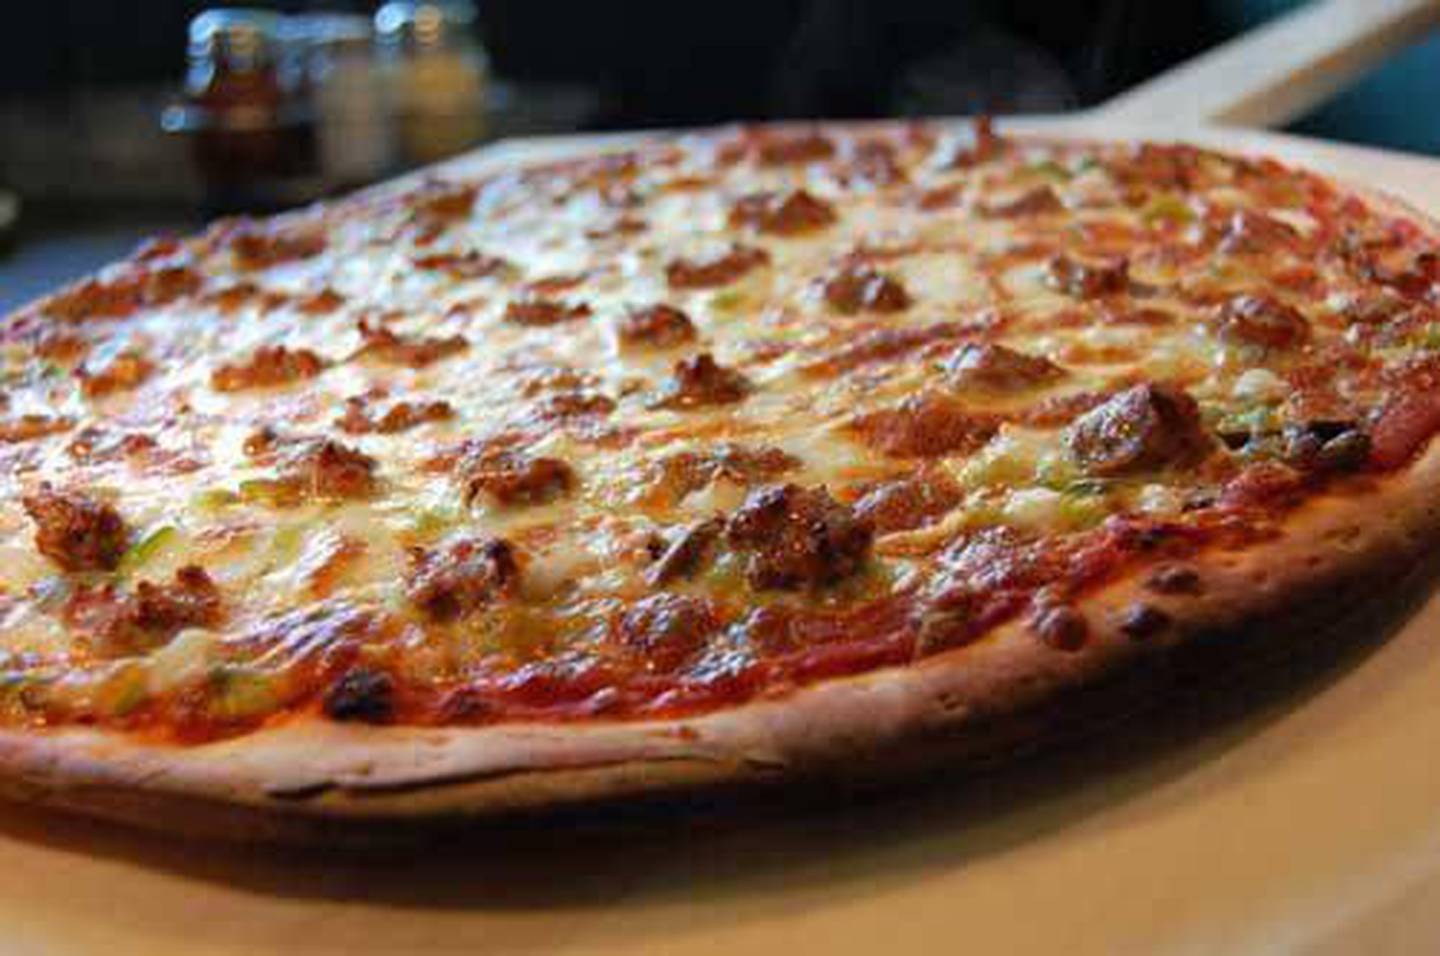 Maciano's Pizza & Pastaria was named one of the best thin crust pizza places in Kane County for 2021 as voted by our Best of the Fox readers.